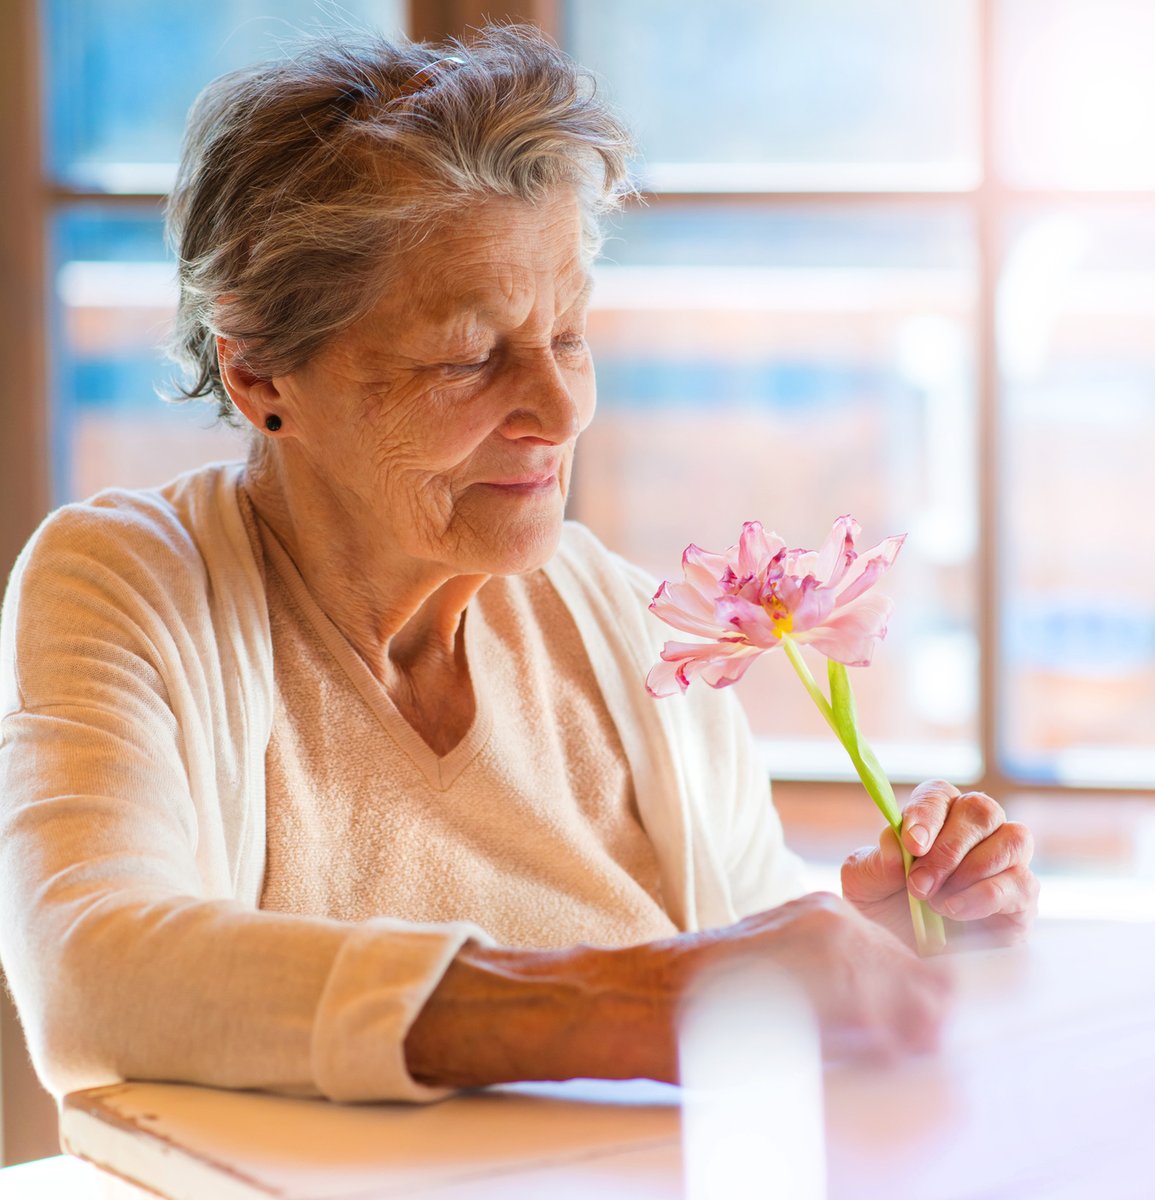 If you are considering writing your Will, you may be interested in our free guide.  
arthritisaction.org.uk/fundraising/le…
After you’ve provided for family and friends, consider a gift to Arthritis Action.
 #WillWriting #LegacyPlanning #ArthritisAction